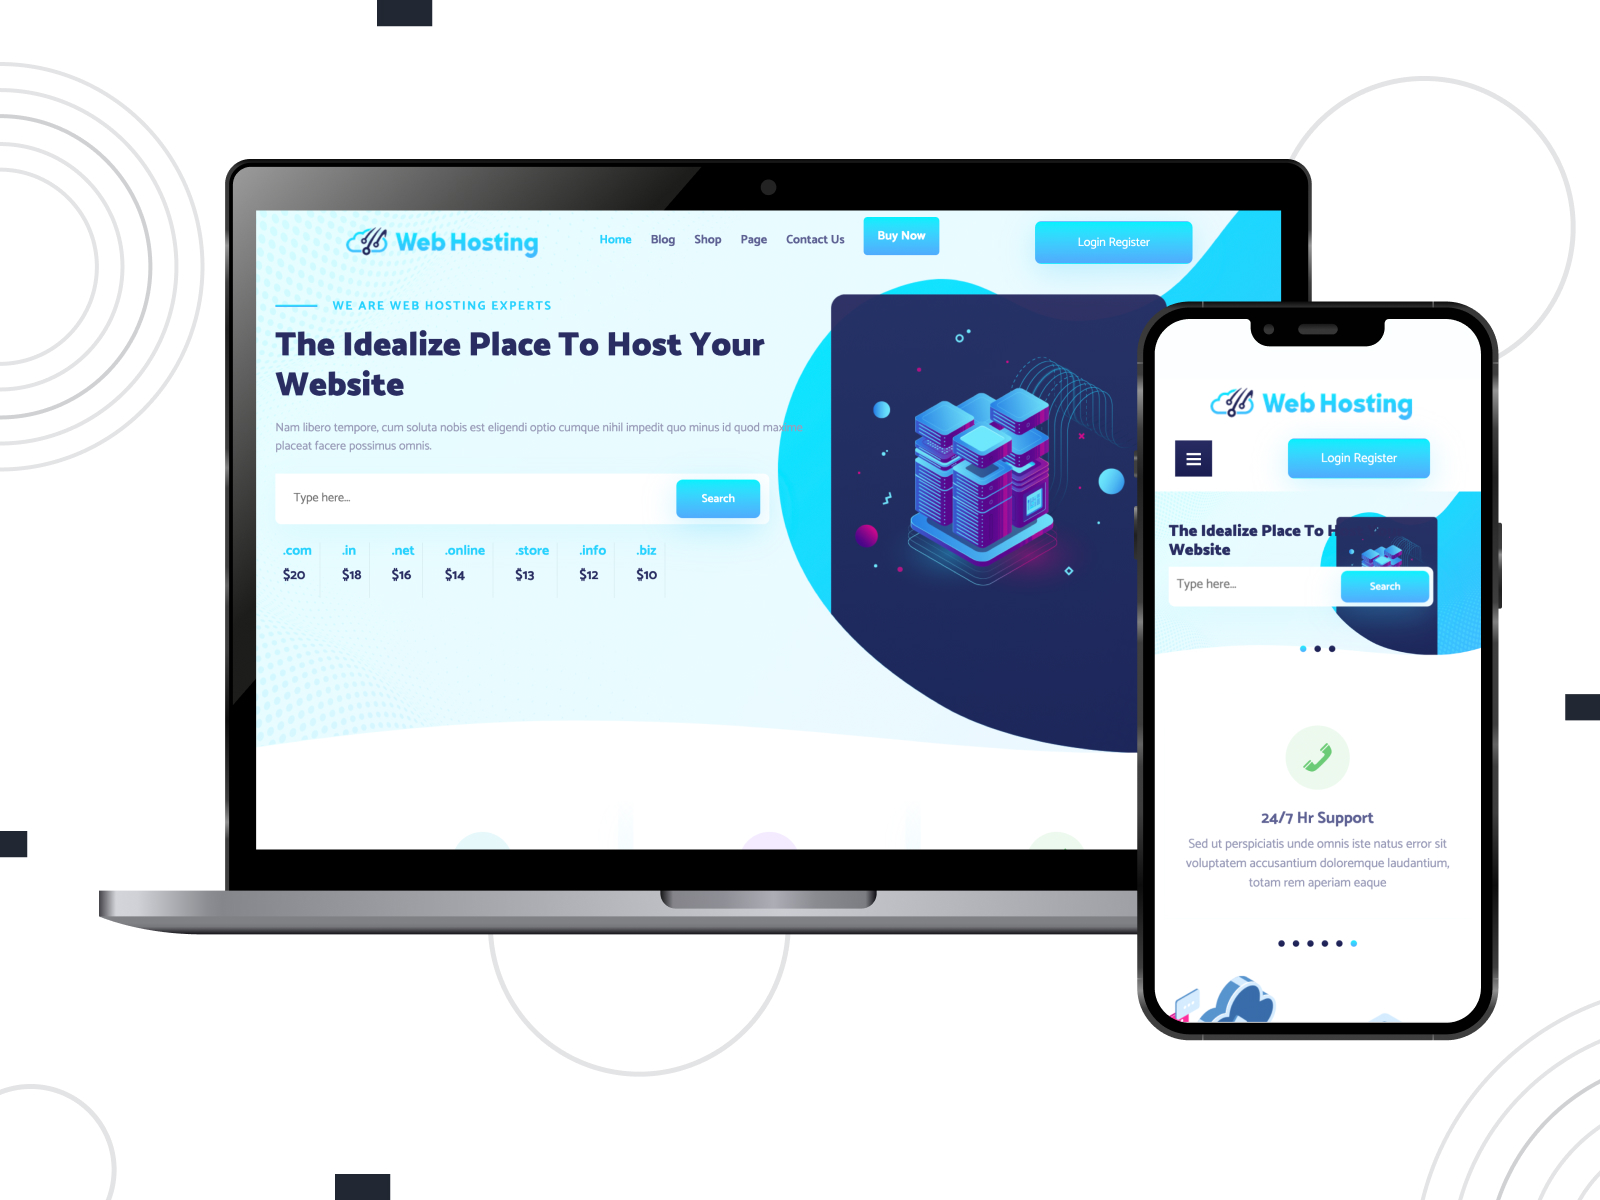 Graphic of Web Hosting Lite, a web hosting-oriented theme for WordPress with a responsive and clean design and easy-to-use navigation menu.